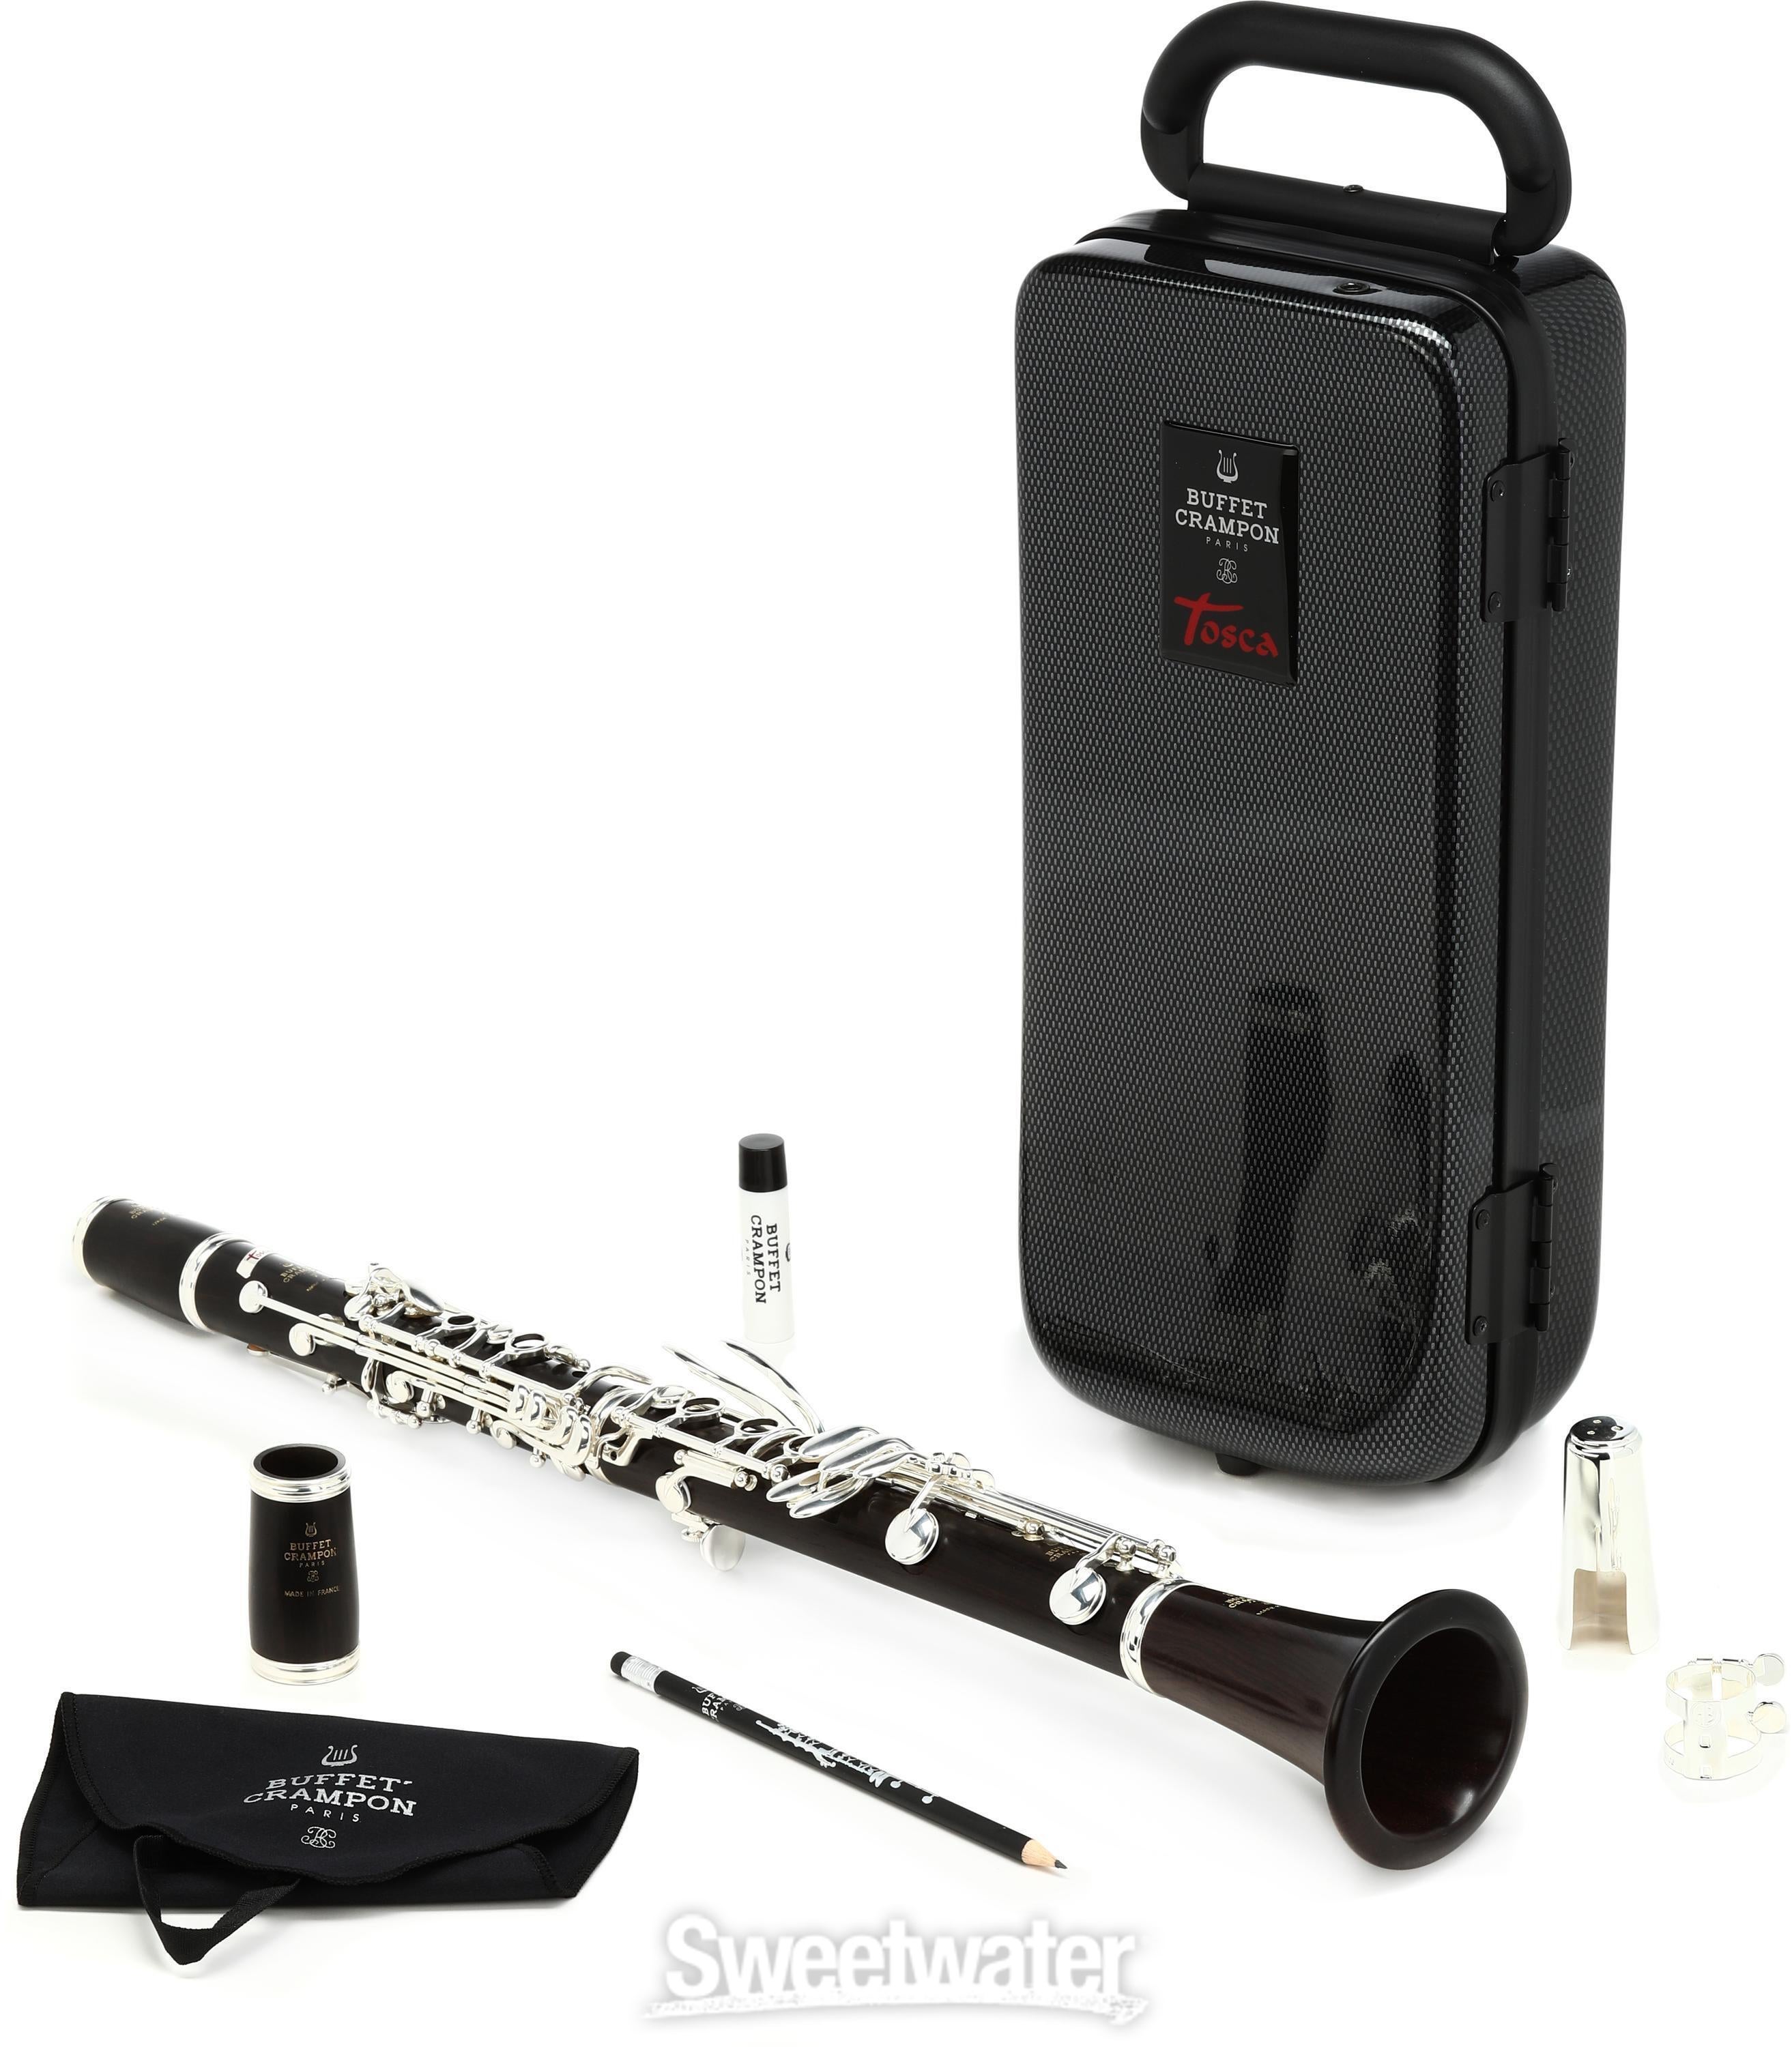 Buffet Crampon Tosca Professional Bb Clarinet - Silver-plated Keys